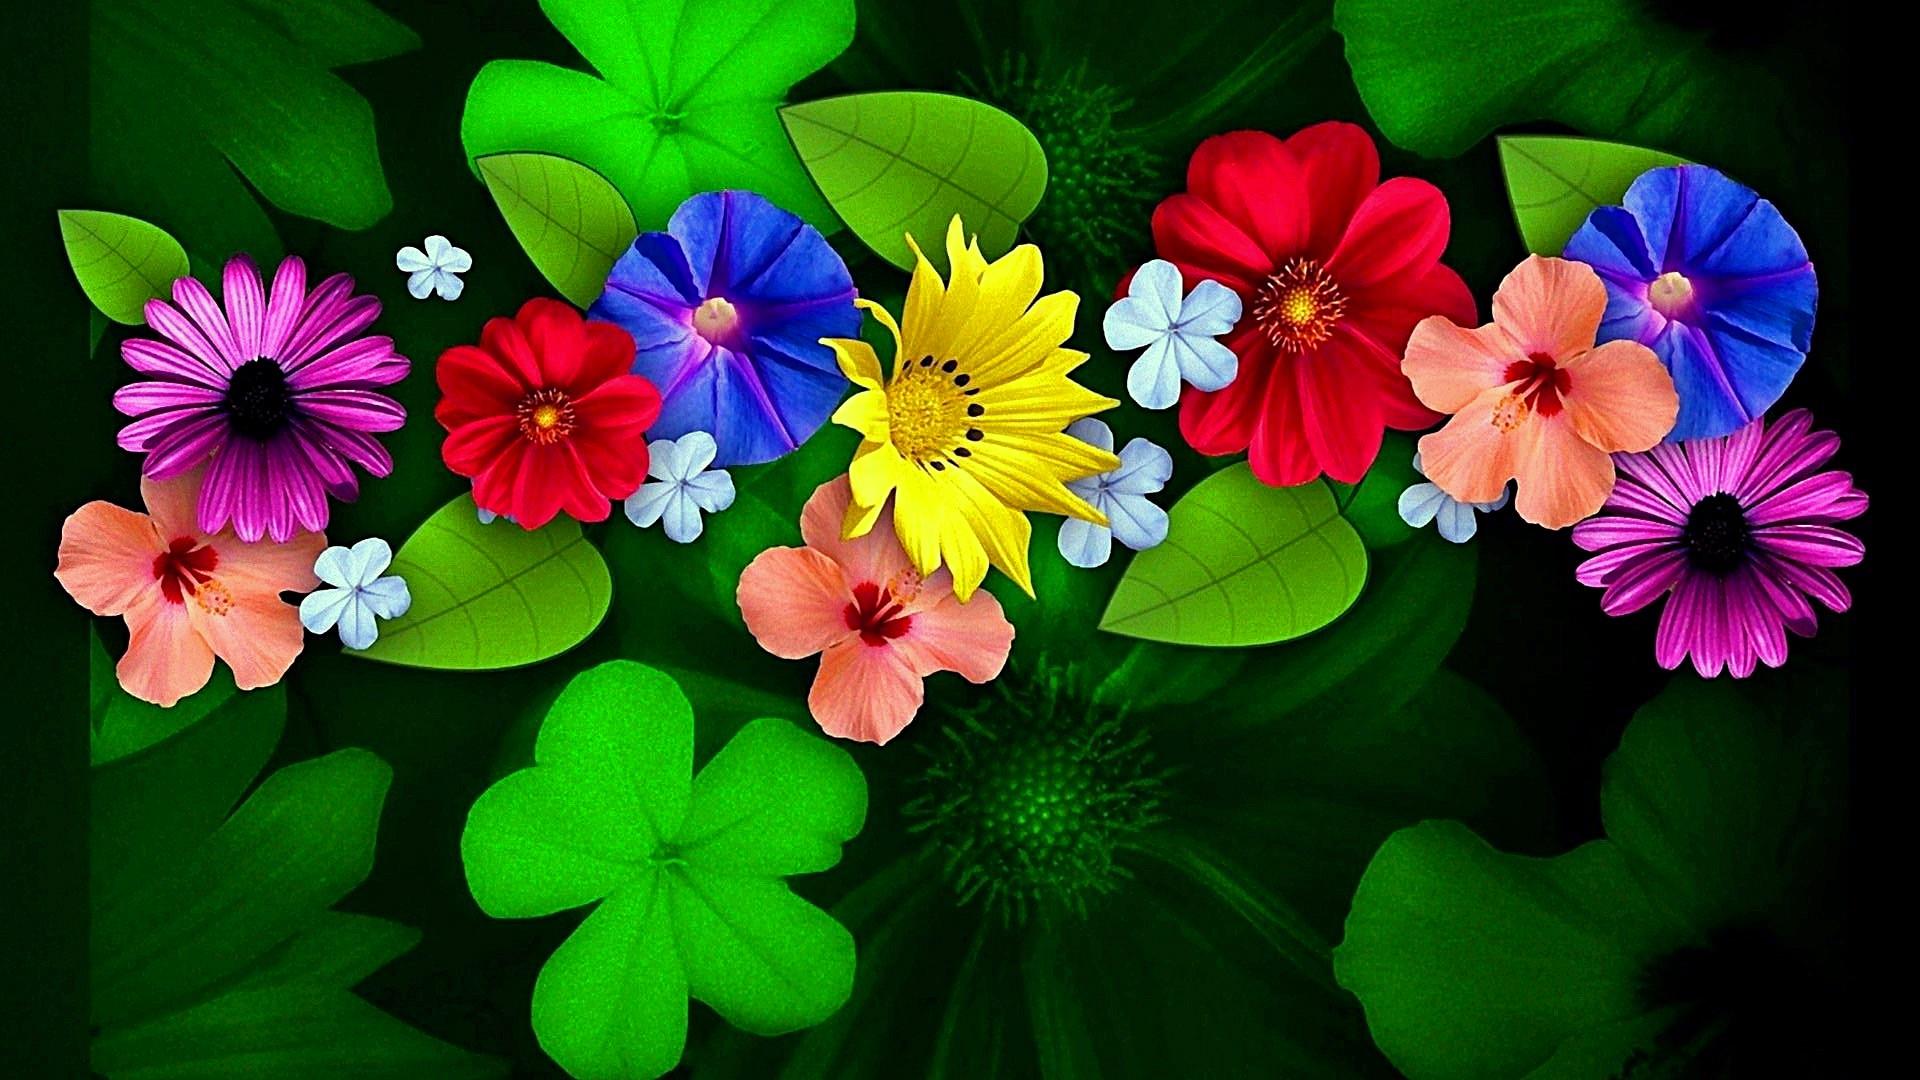 Green Flower Pictures Wallpapers